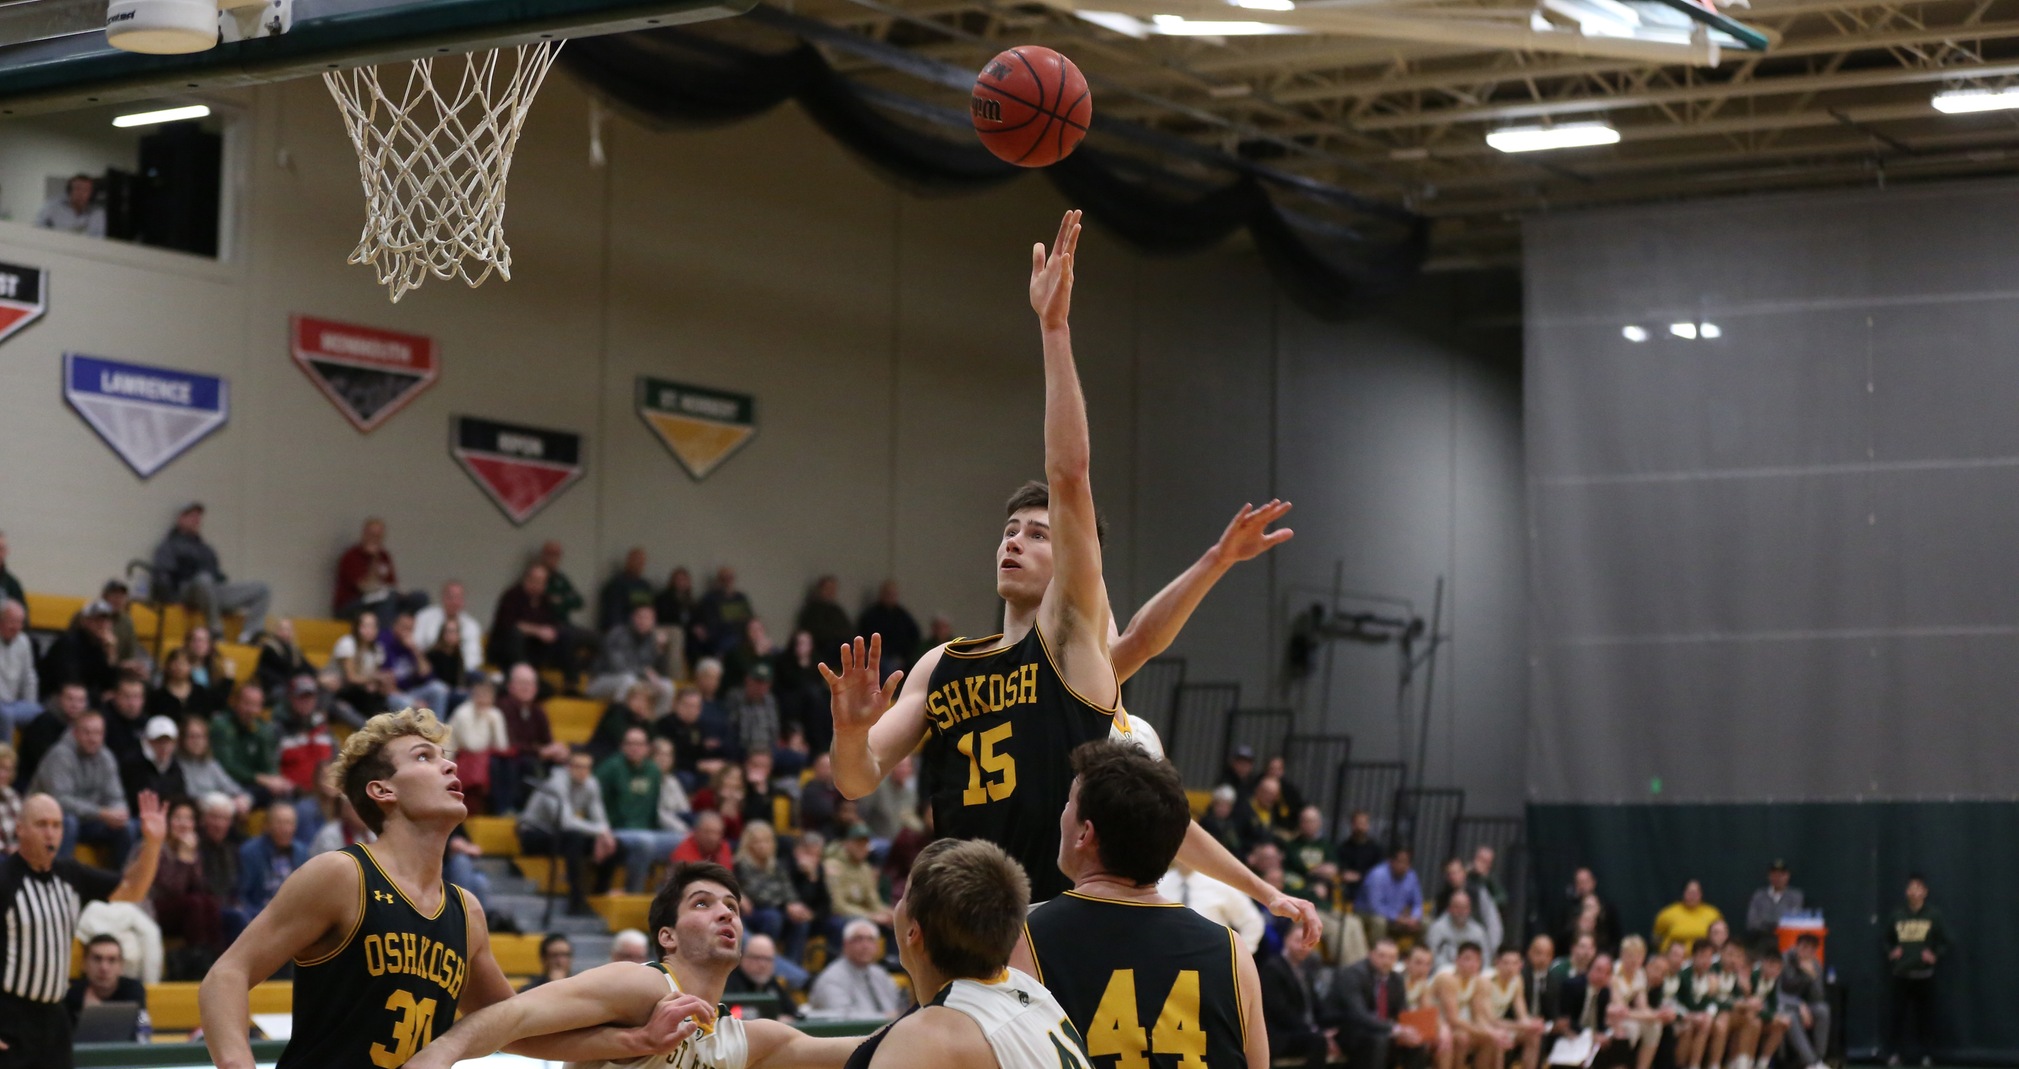 Adam Fravert scored 21 of his game-high 28 points against the Blugolds in the second half.